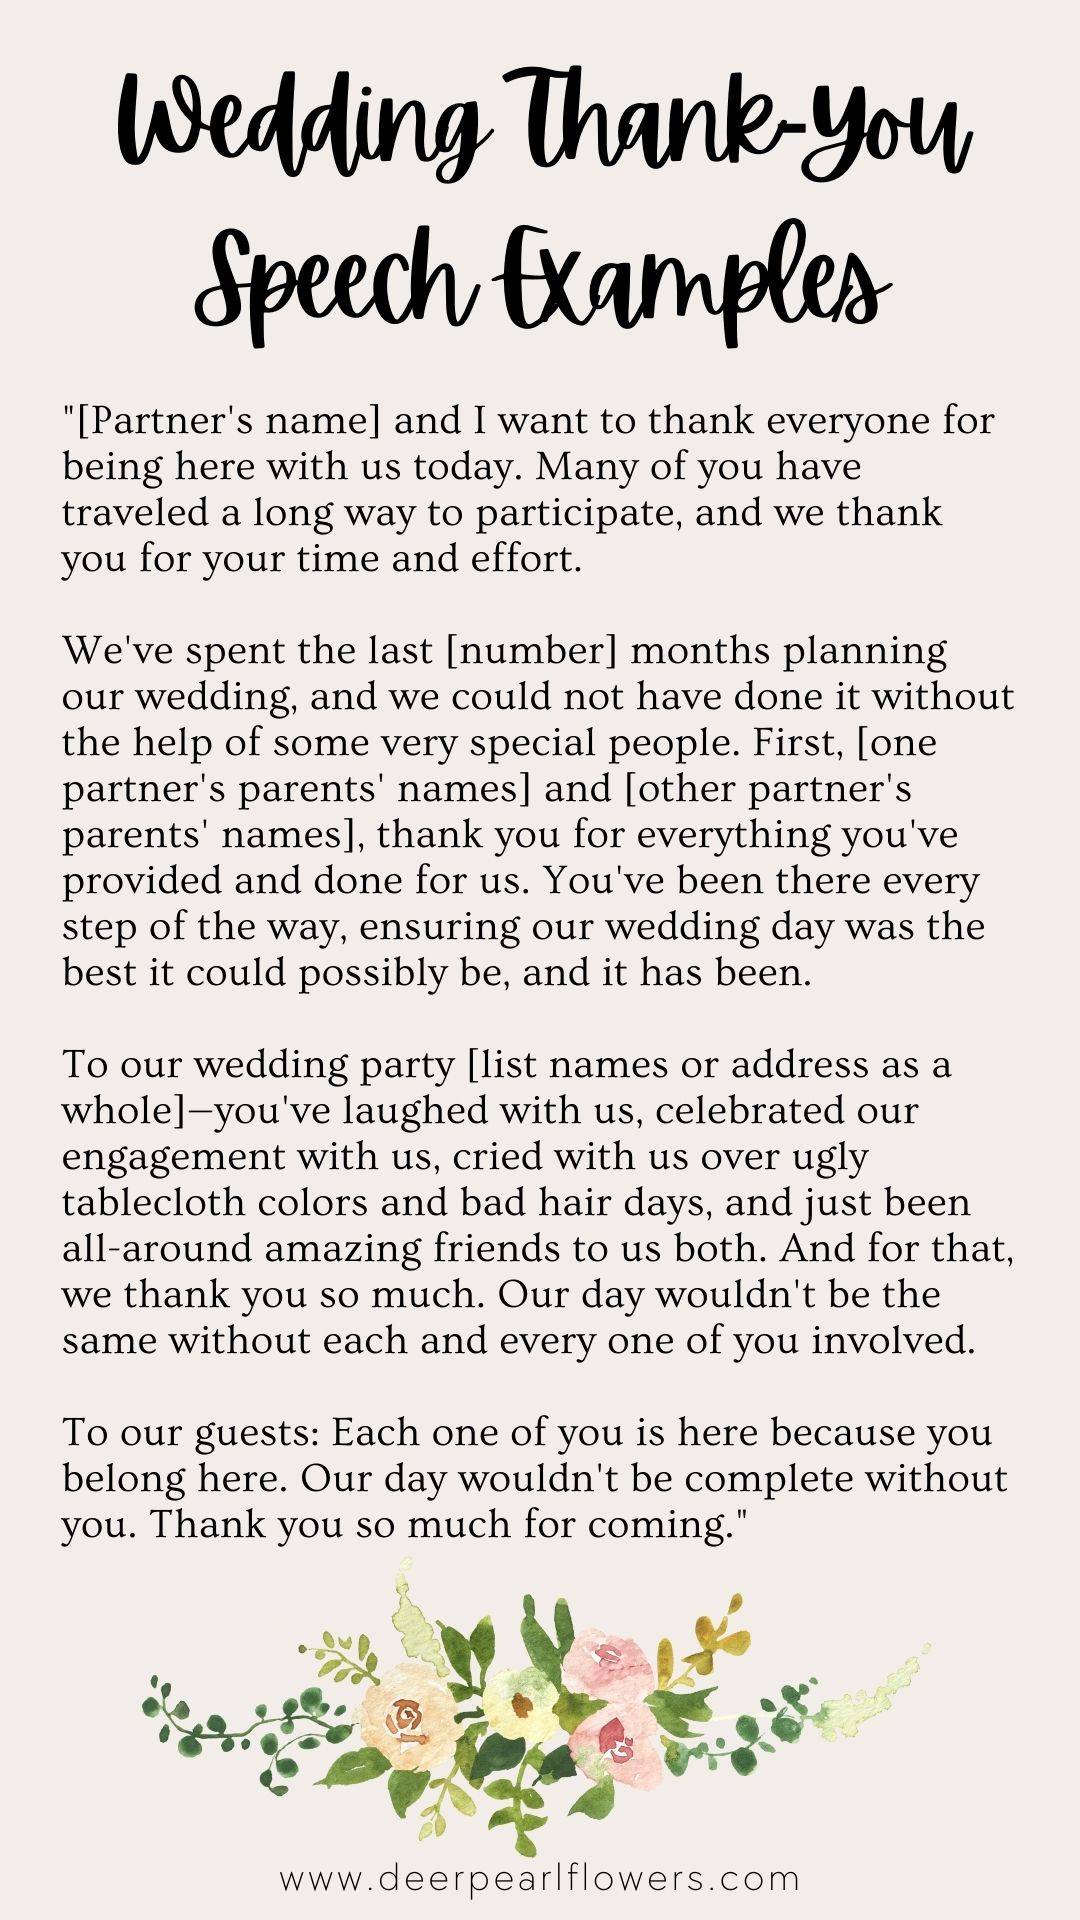 how to write a thank you speech for wedding